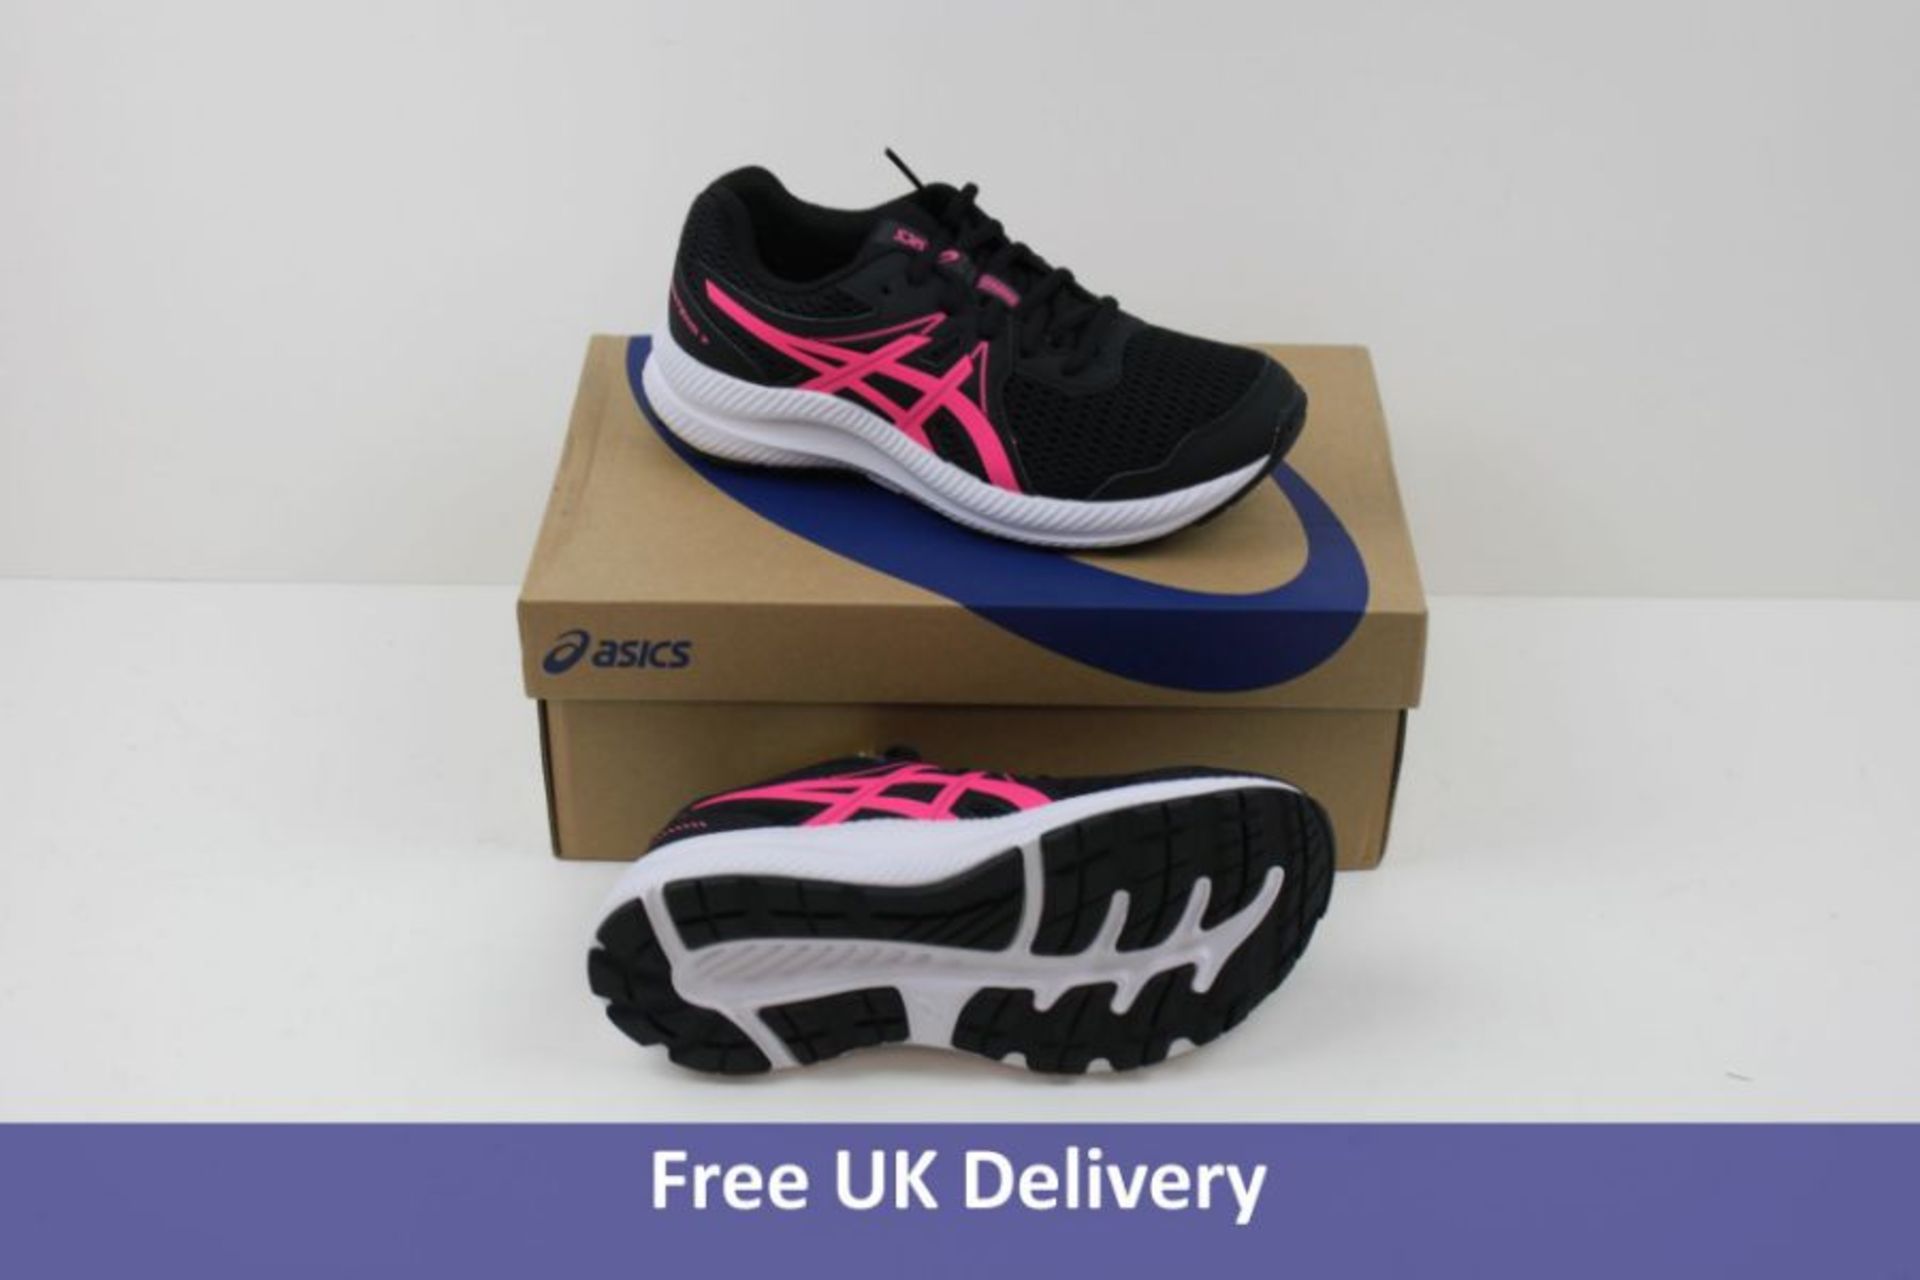 Asics Kid's Contend 7 GS Trainers, Black and Hot Pink, UK 3